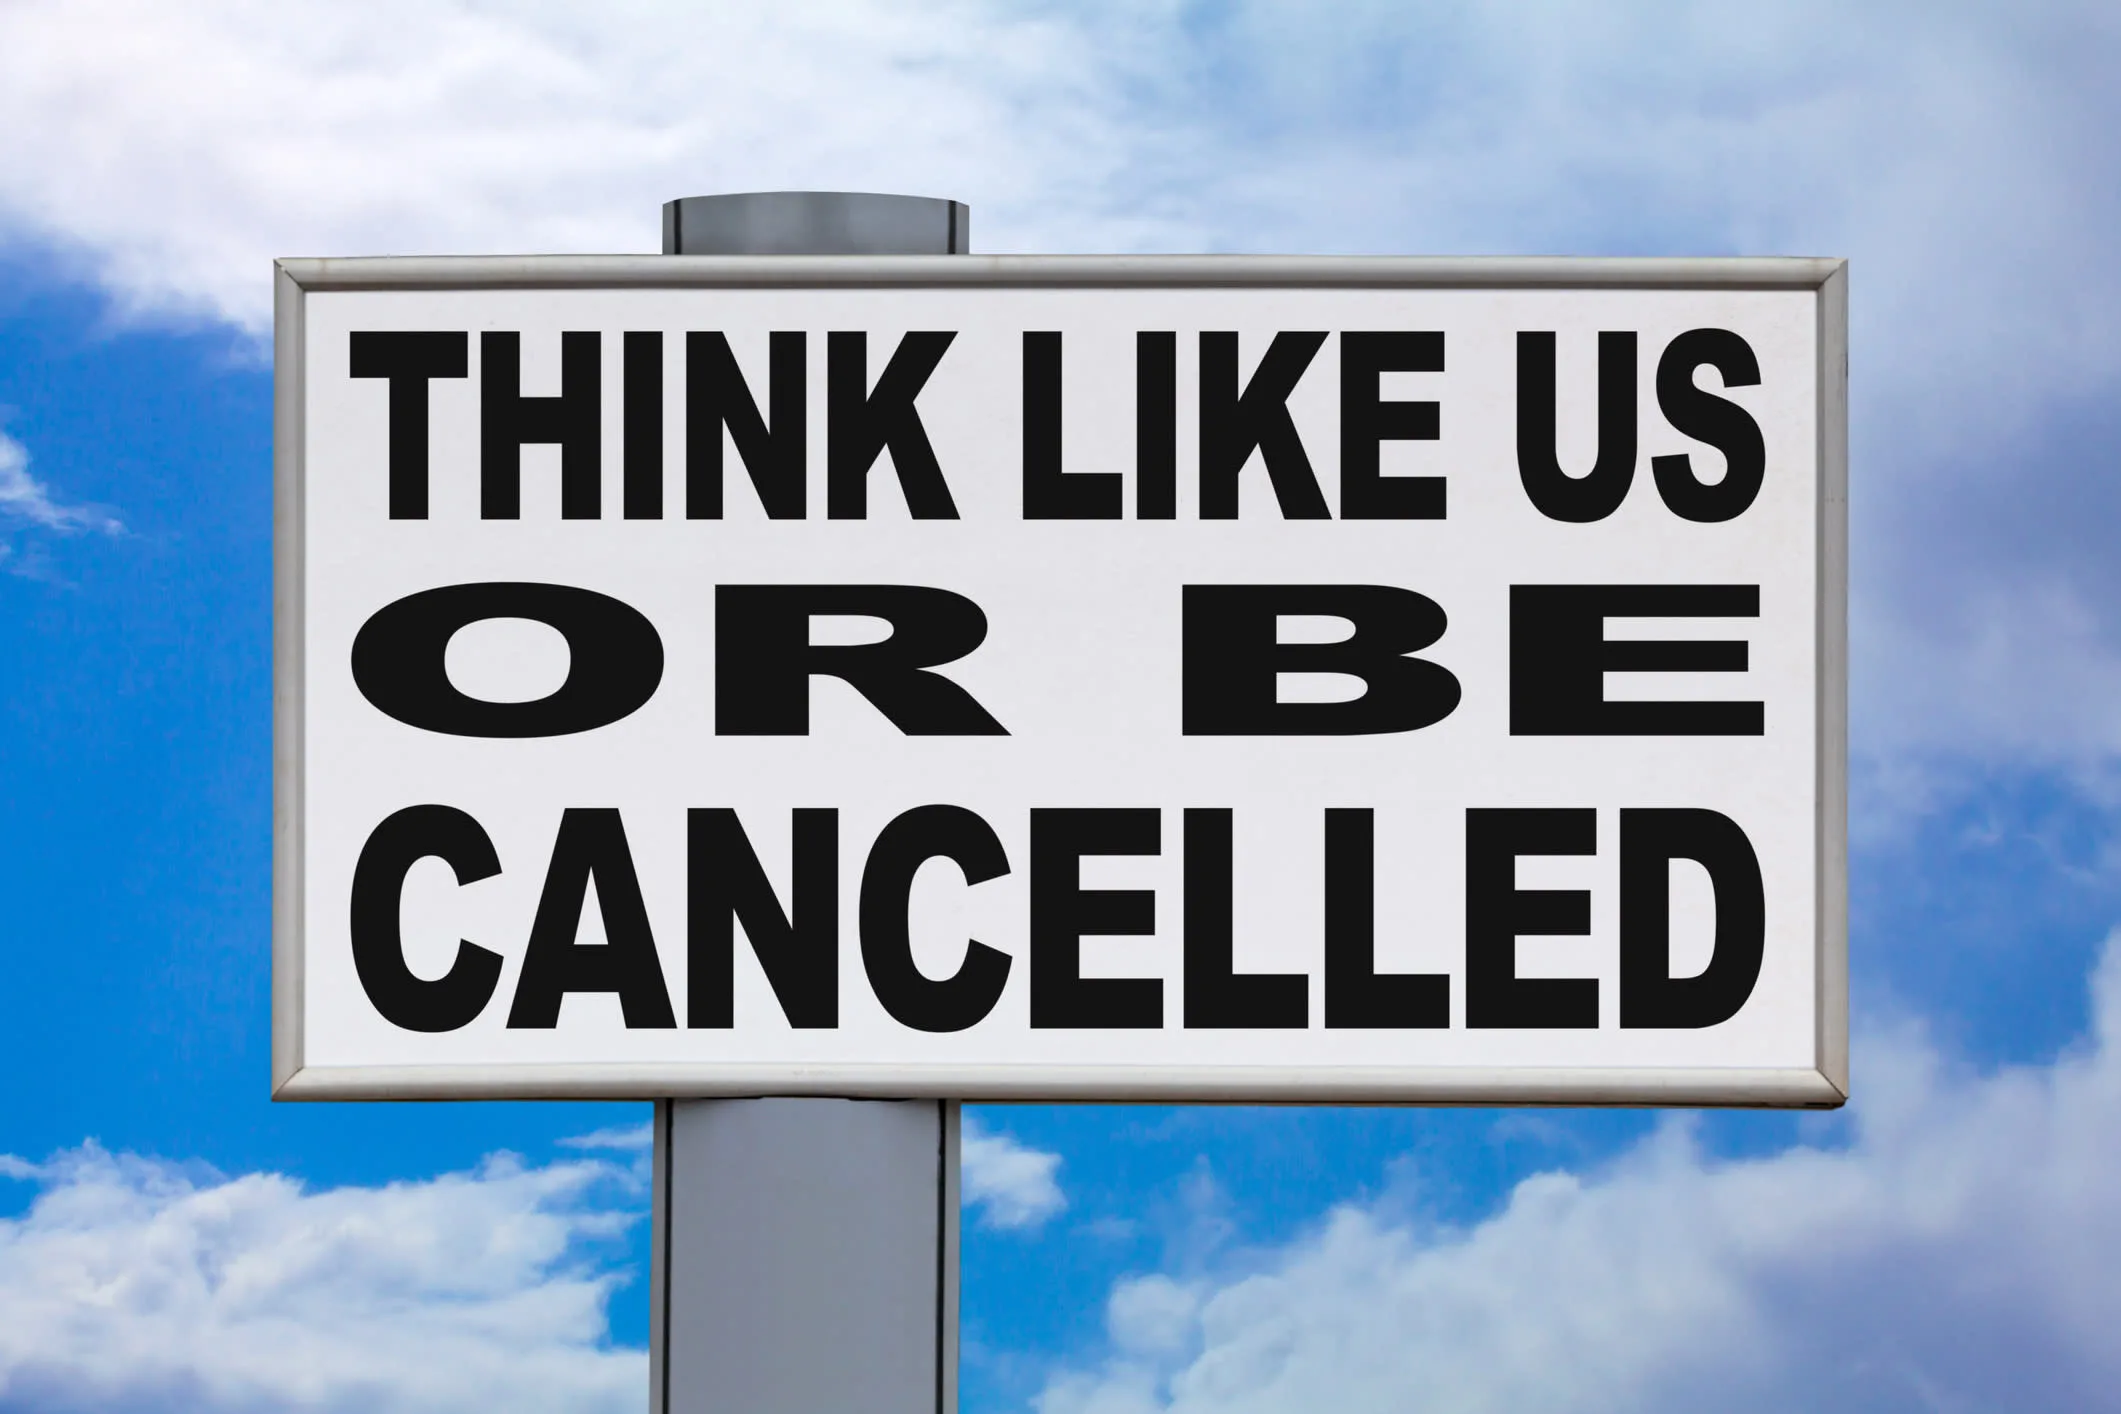 A sign with the words: Think like us or be cancelled written on it against a blue sky with clouds.